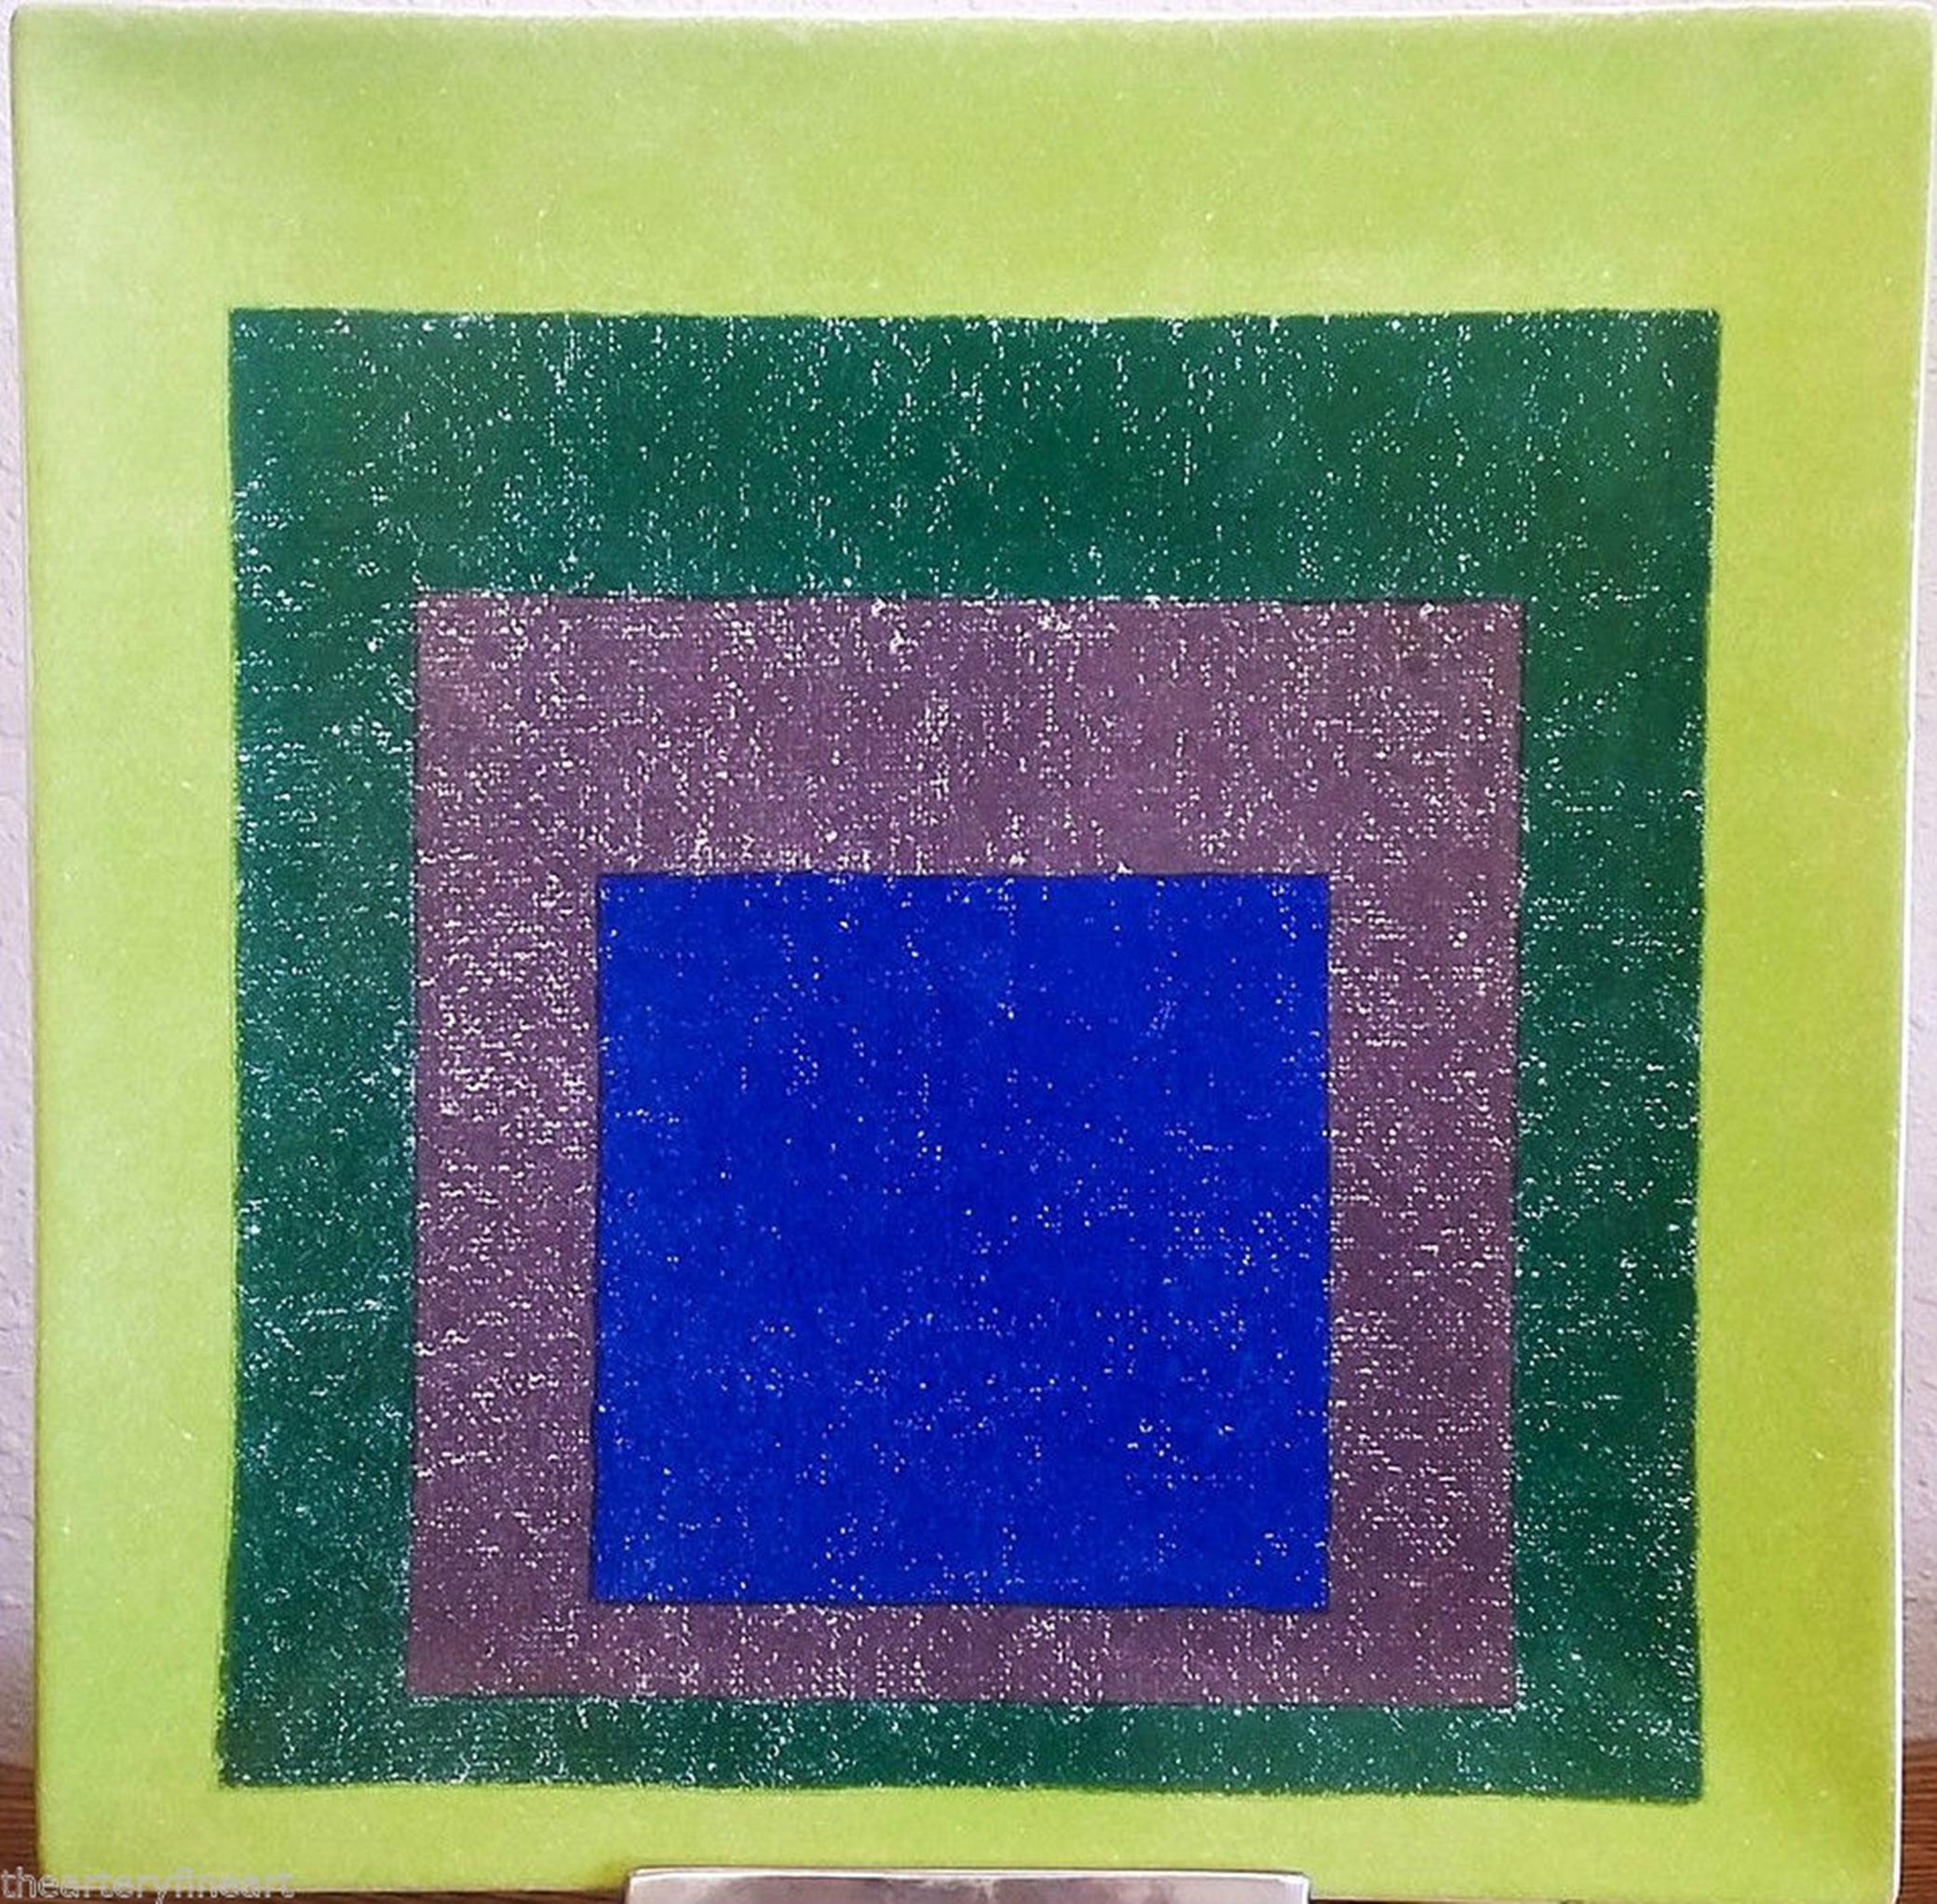 Limited Edition Study for Homage to the Square porcelain plate in box for MOCA - Art by Josef Albers